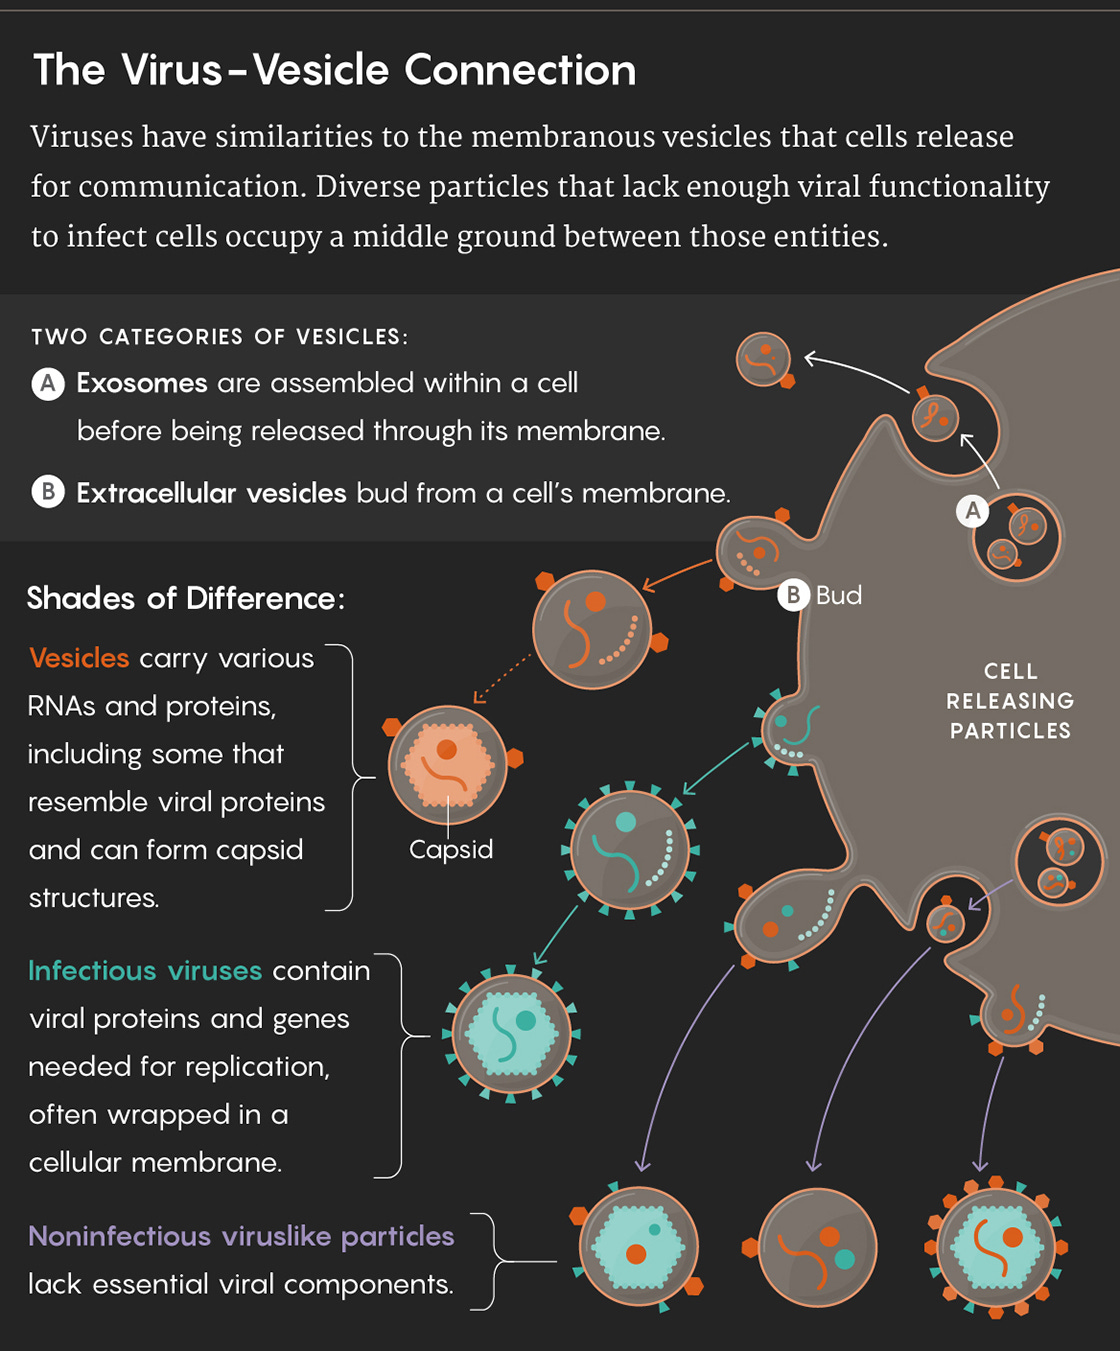 Graphic illustrating the virus-vesicle connection: Viruses have similarities to the membranous vesicles that cells release for communication. Diverse particles that lack enough viral functionality to infect cells occupy a middle ground between those entities. TWO CATEGORIES OF VESICLES: Exosomes are assembled within a cell before being released through its membrane. Extracellular vesicles bud from a cell’s membrane. Shades of Difference: Vesicles carry various RNAs and proteins, including some that resemble viral proteins and can form capsid structures. Infectious viruses contain viral proteins and genes needed for replication, often wrapped in a cellular membrane. Noninfectious viruslike particles lack essential viral components.